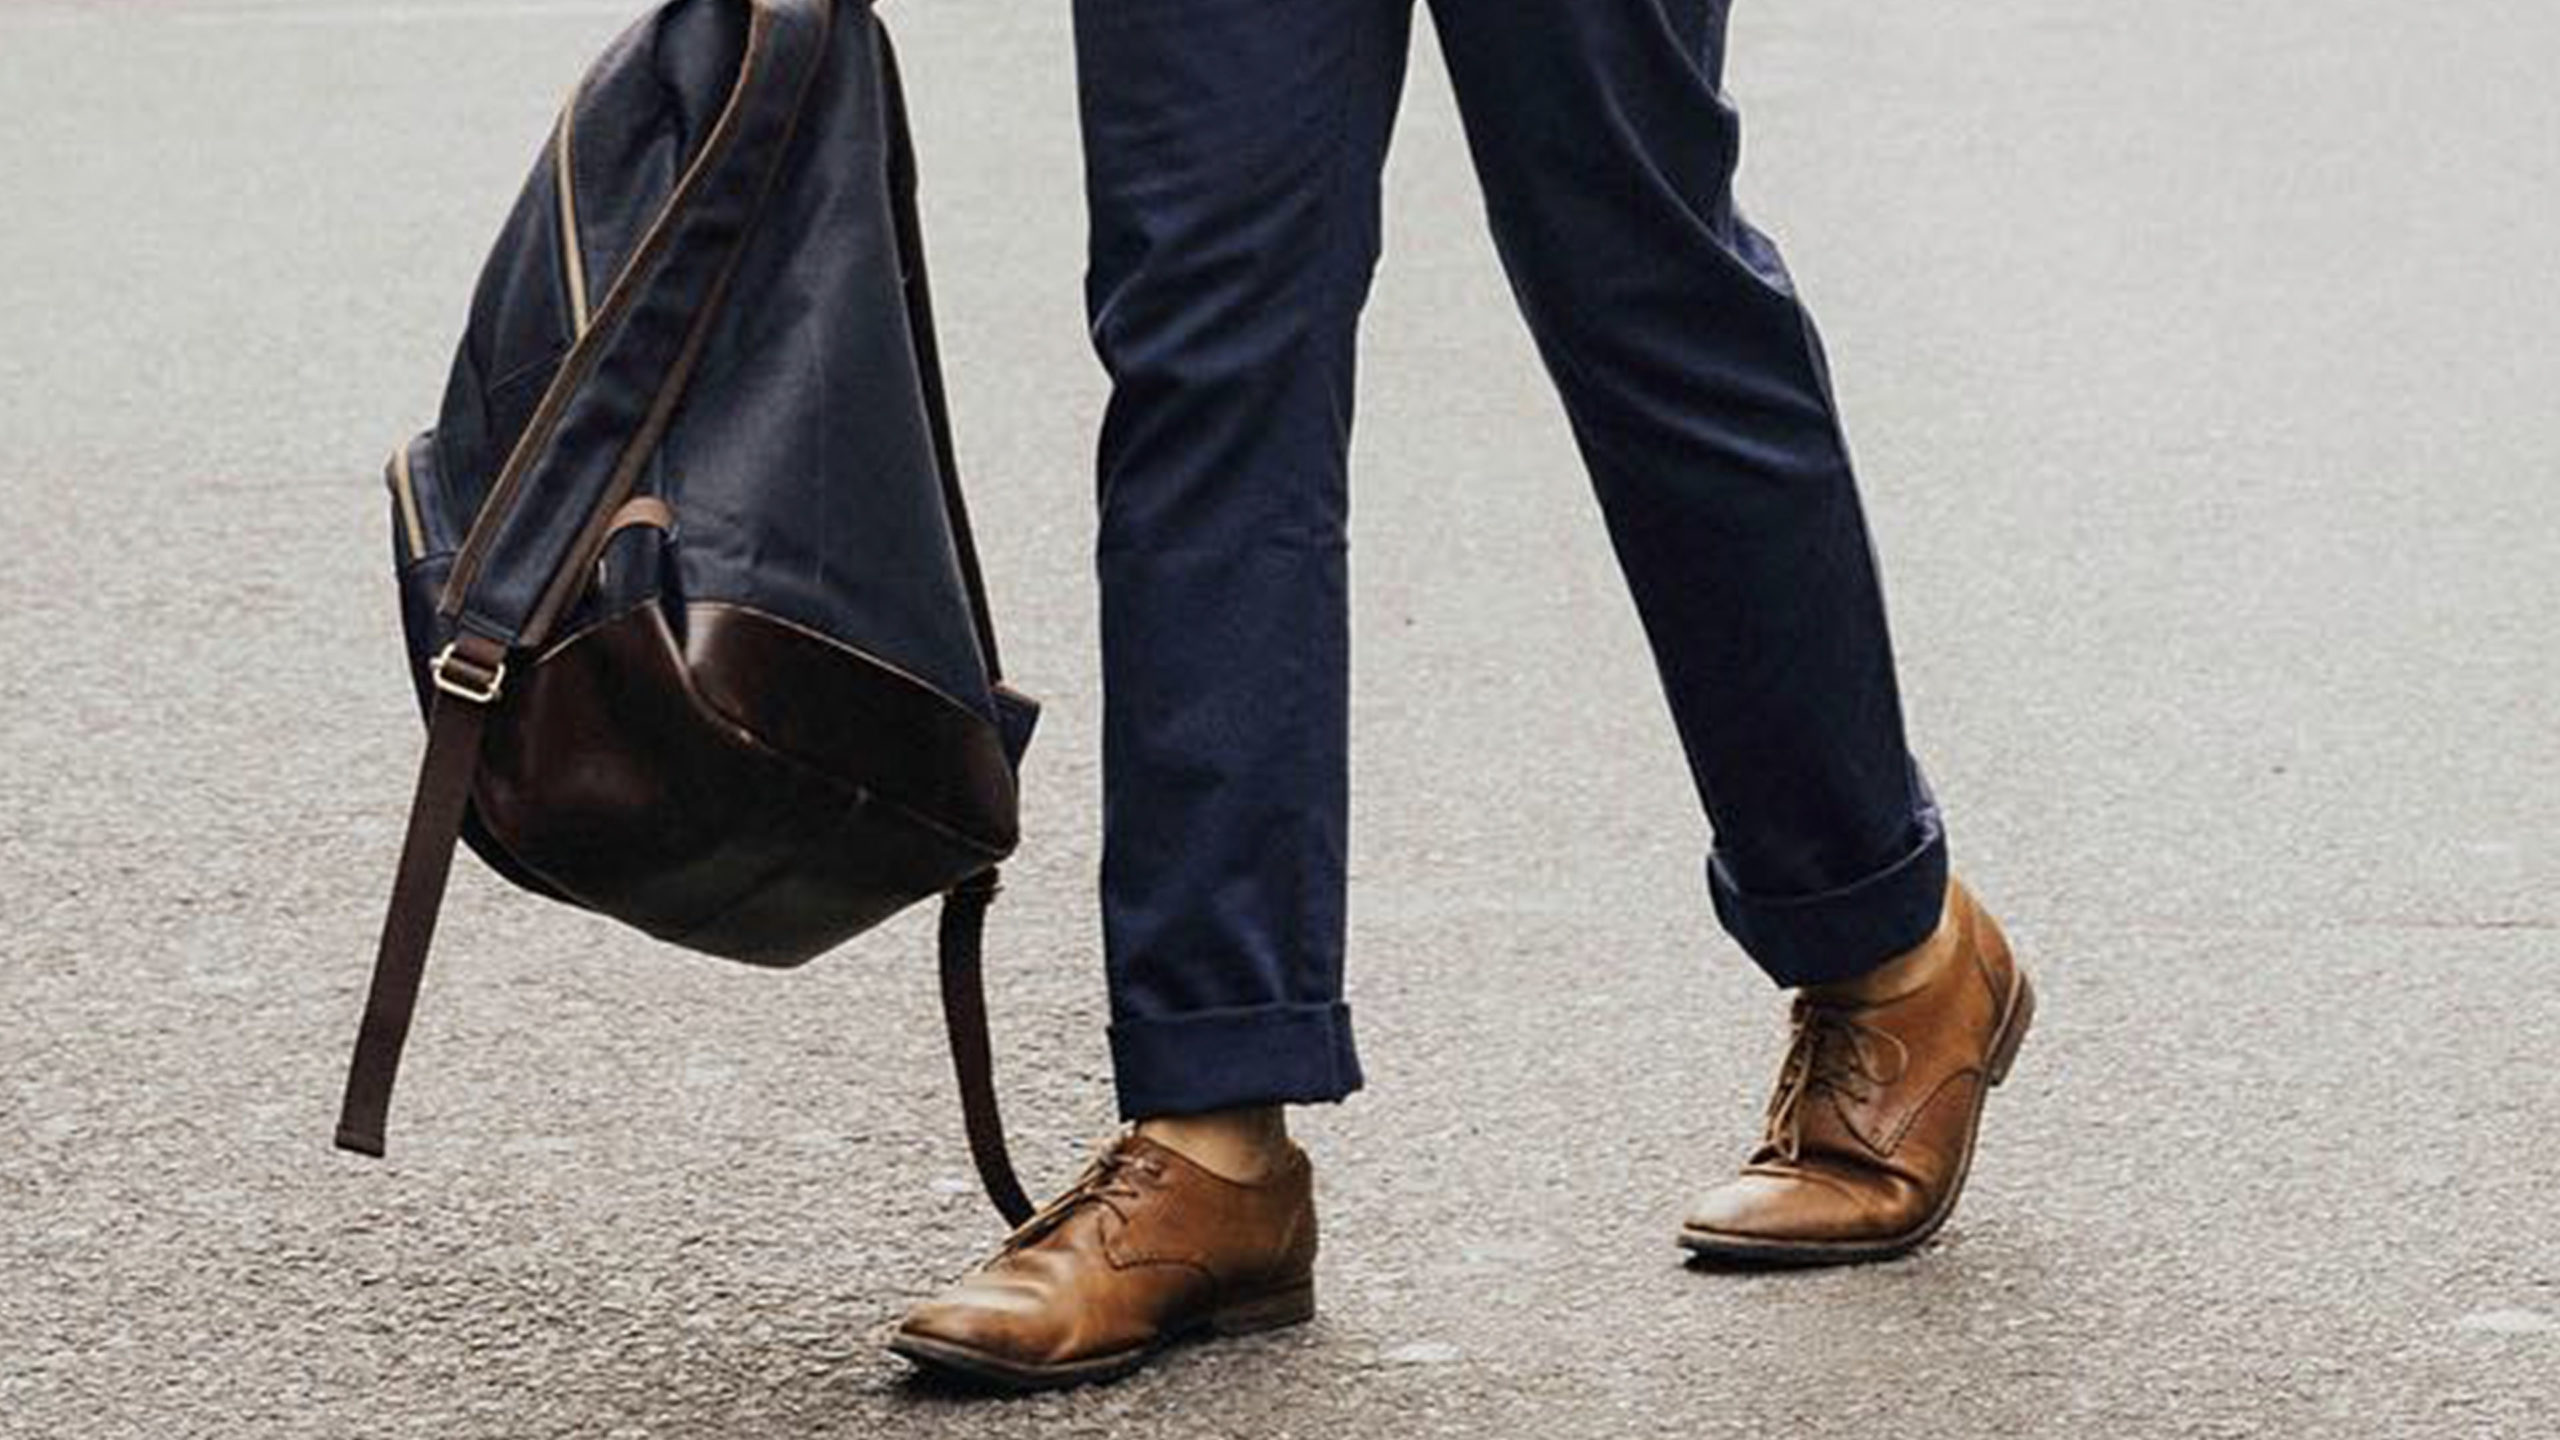 Chinos: How to Wear Them Well - navy chinos - blue chinos - casual chinos - how to wear chinos - smart casual chinos - casual chinos - how to style chinos - how to wear chinos - colorful chinos - dandy in the bronx